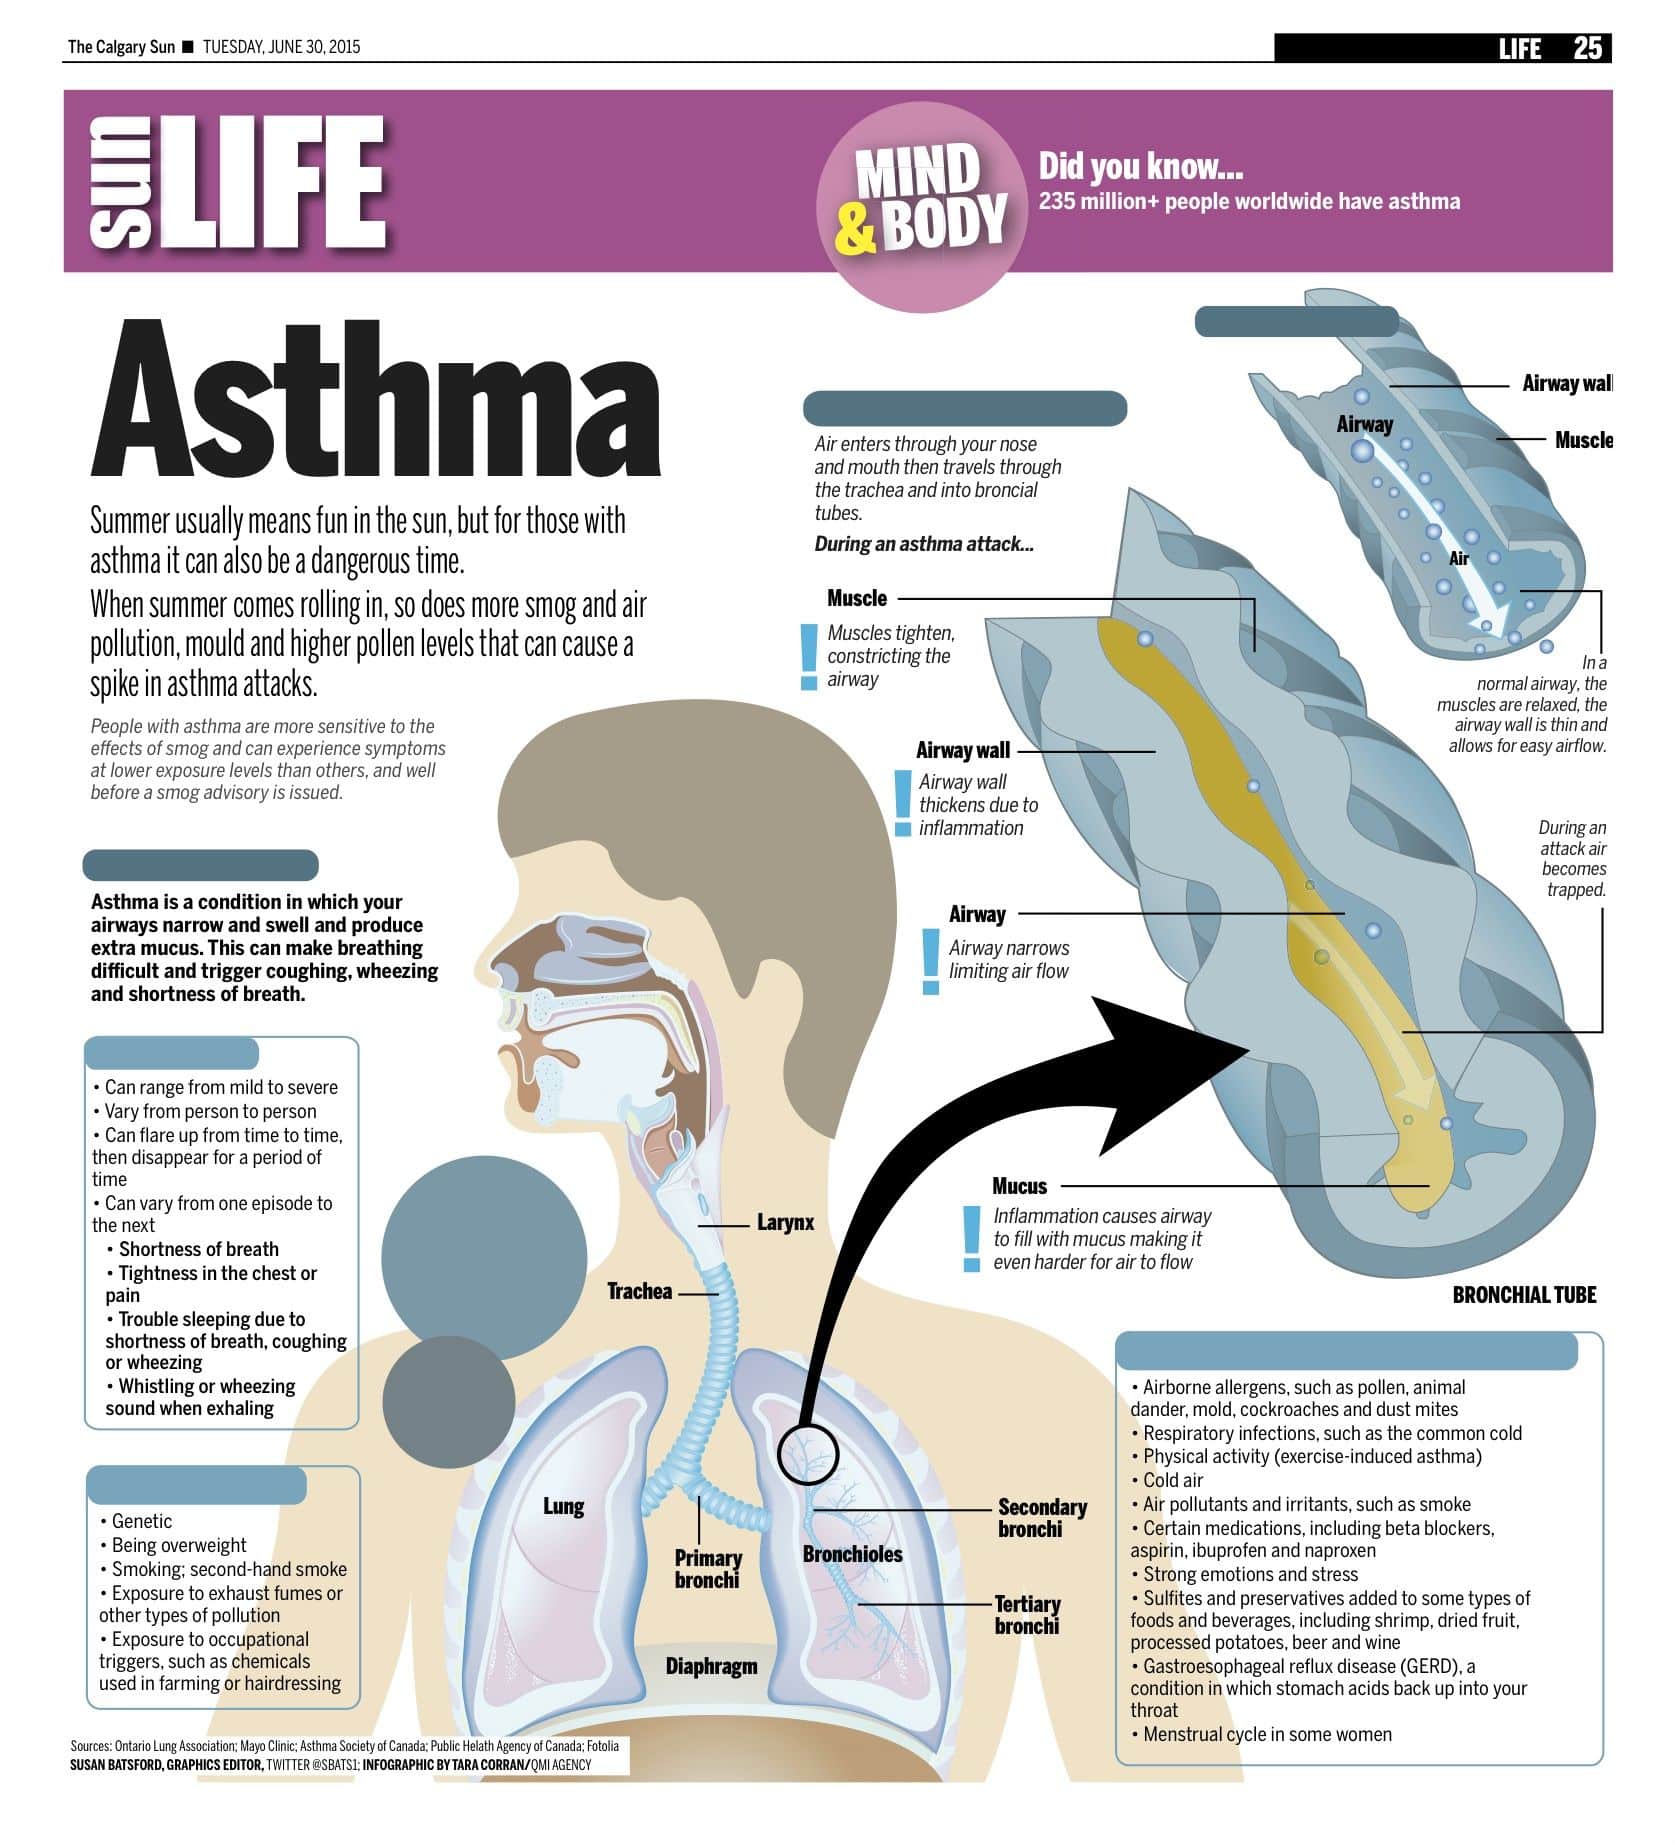 Summer usually means fun in the sun, but for those with asthma it can ...